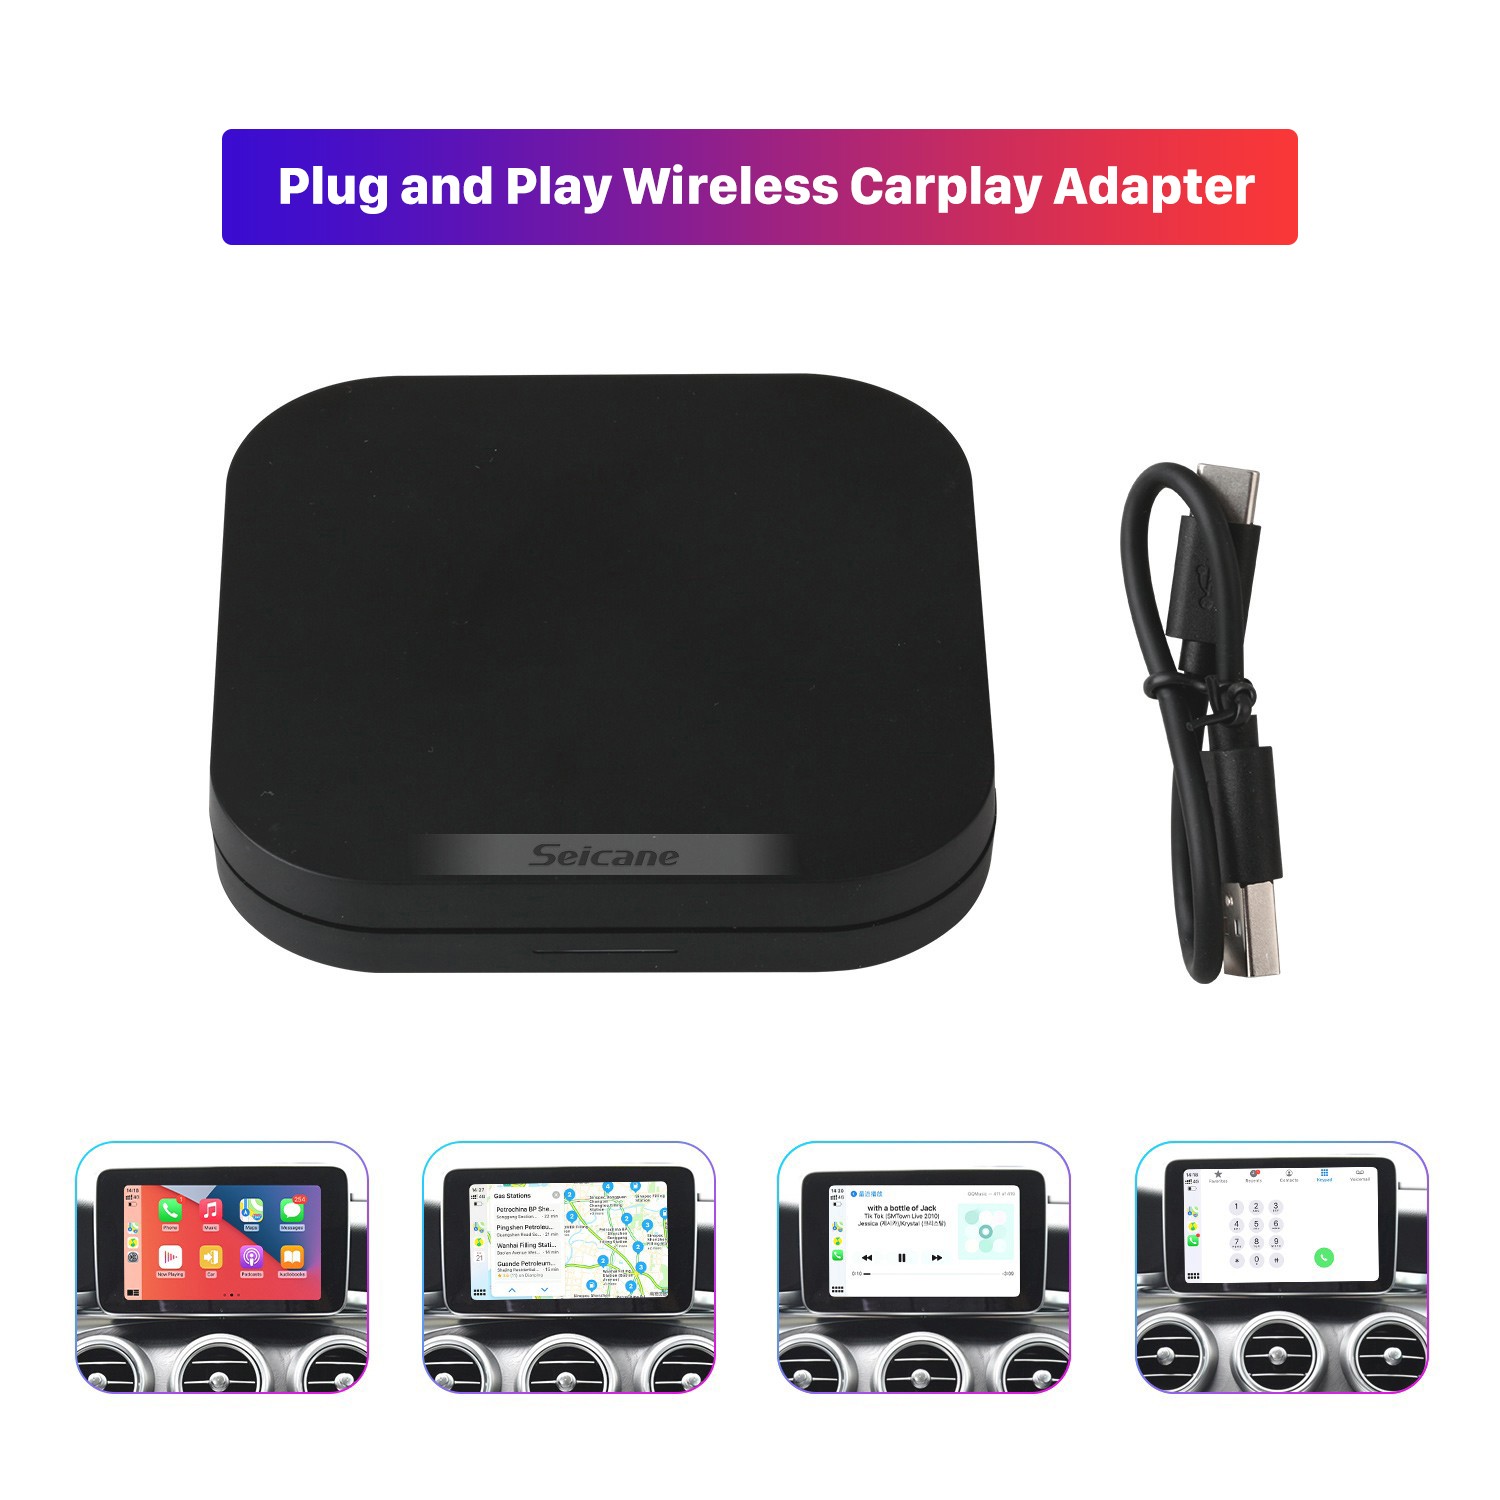 Plug and Play Wireless Carplay Adapter for Factory Wired Carplay